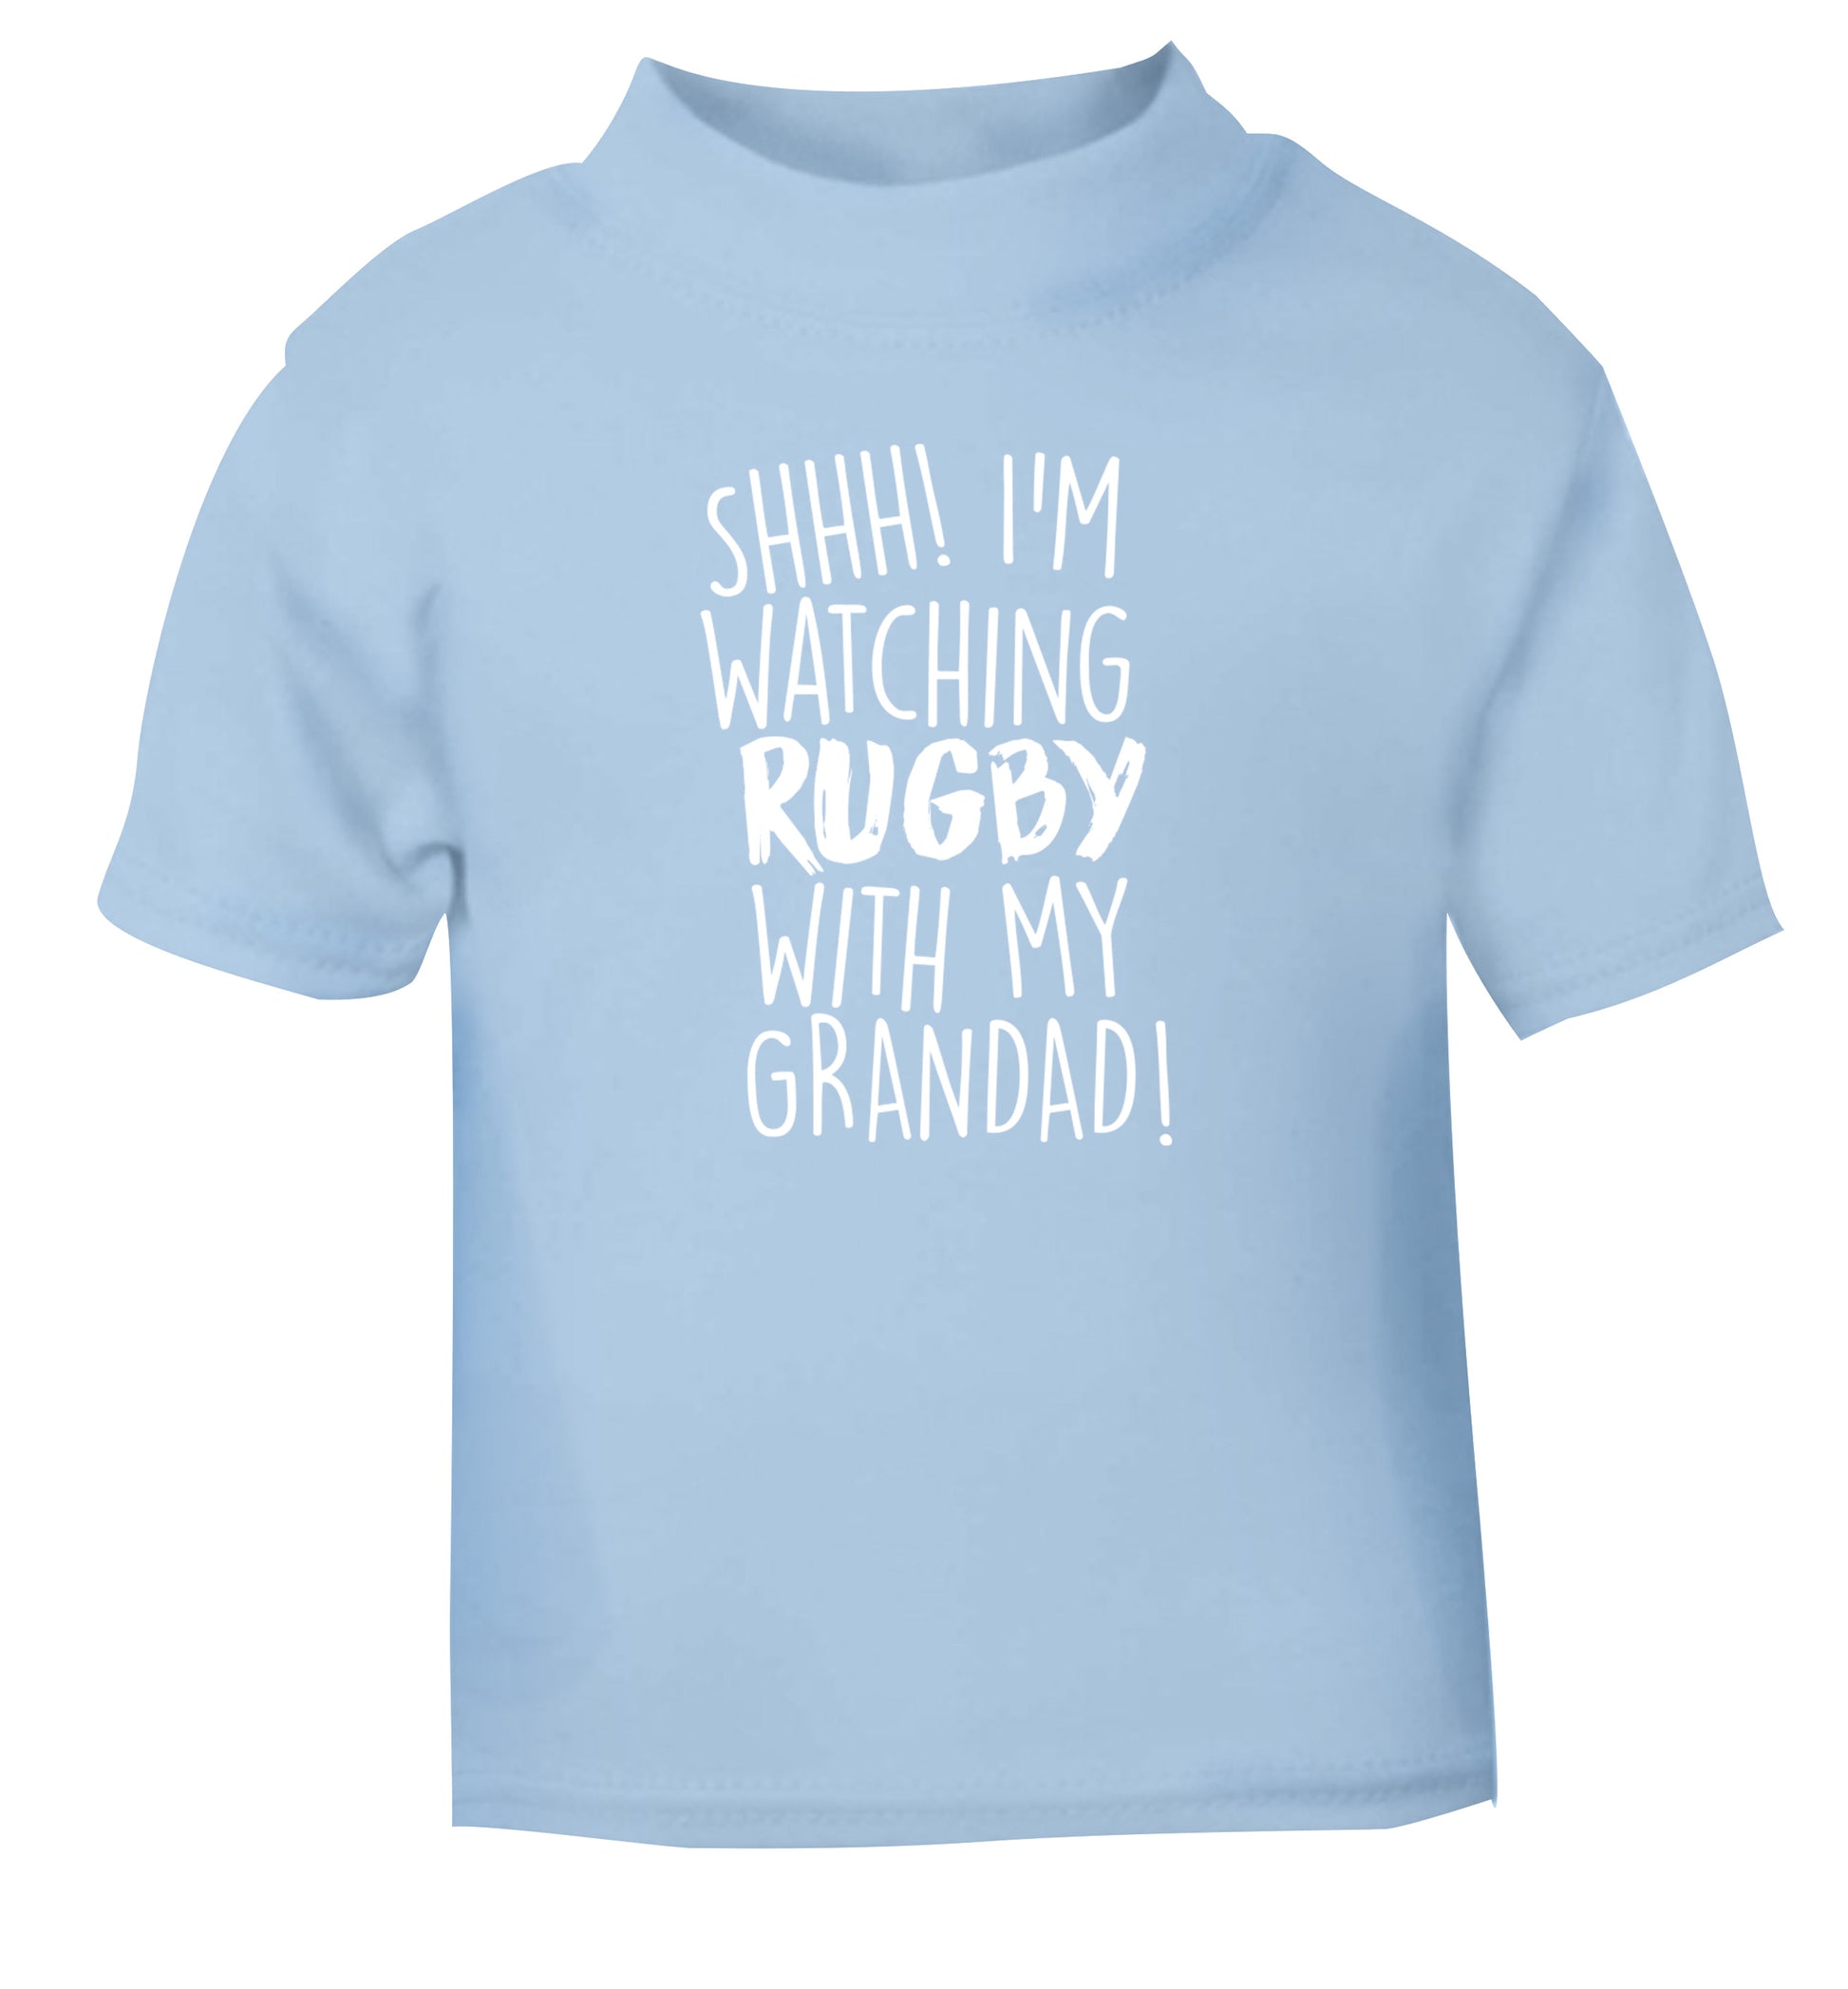 Shh I'm watching rugby with my grandad light blue Baby Toddler Tshirt 2 Years